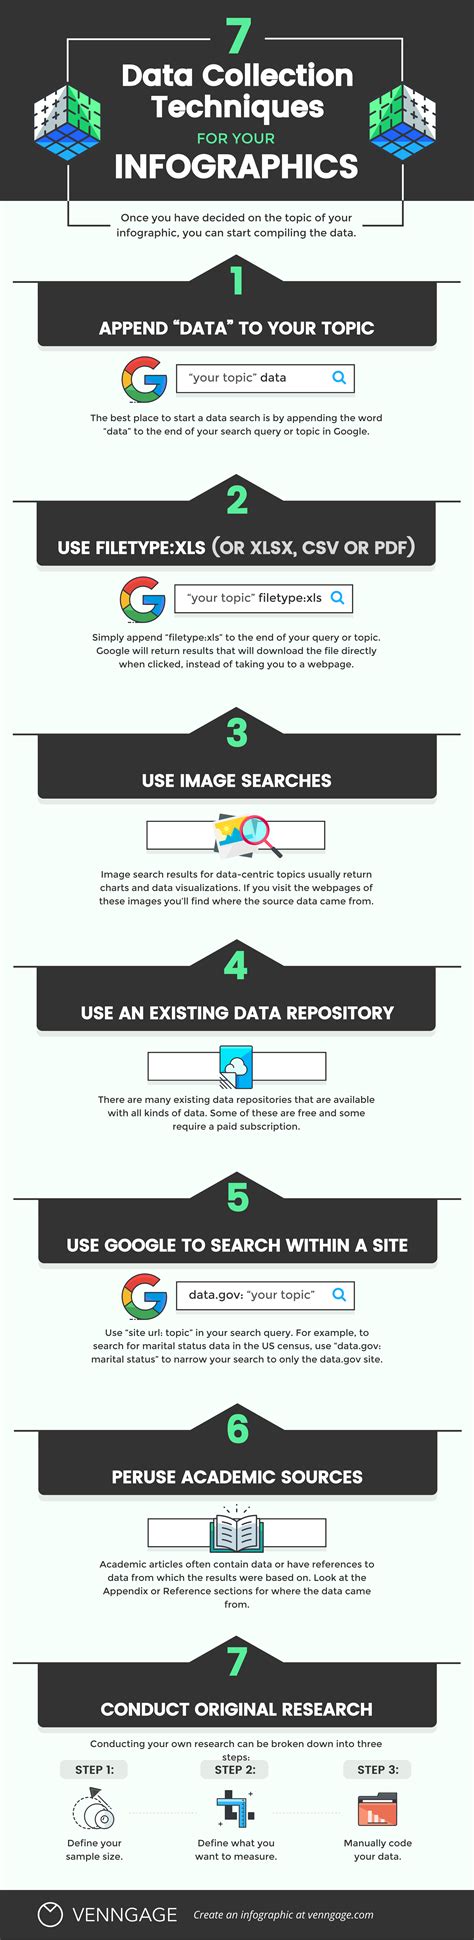 data collection techniques    infographic venngage